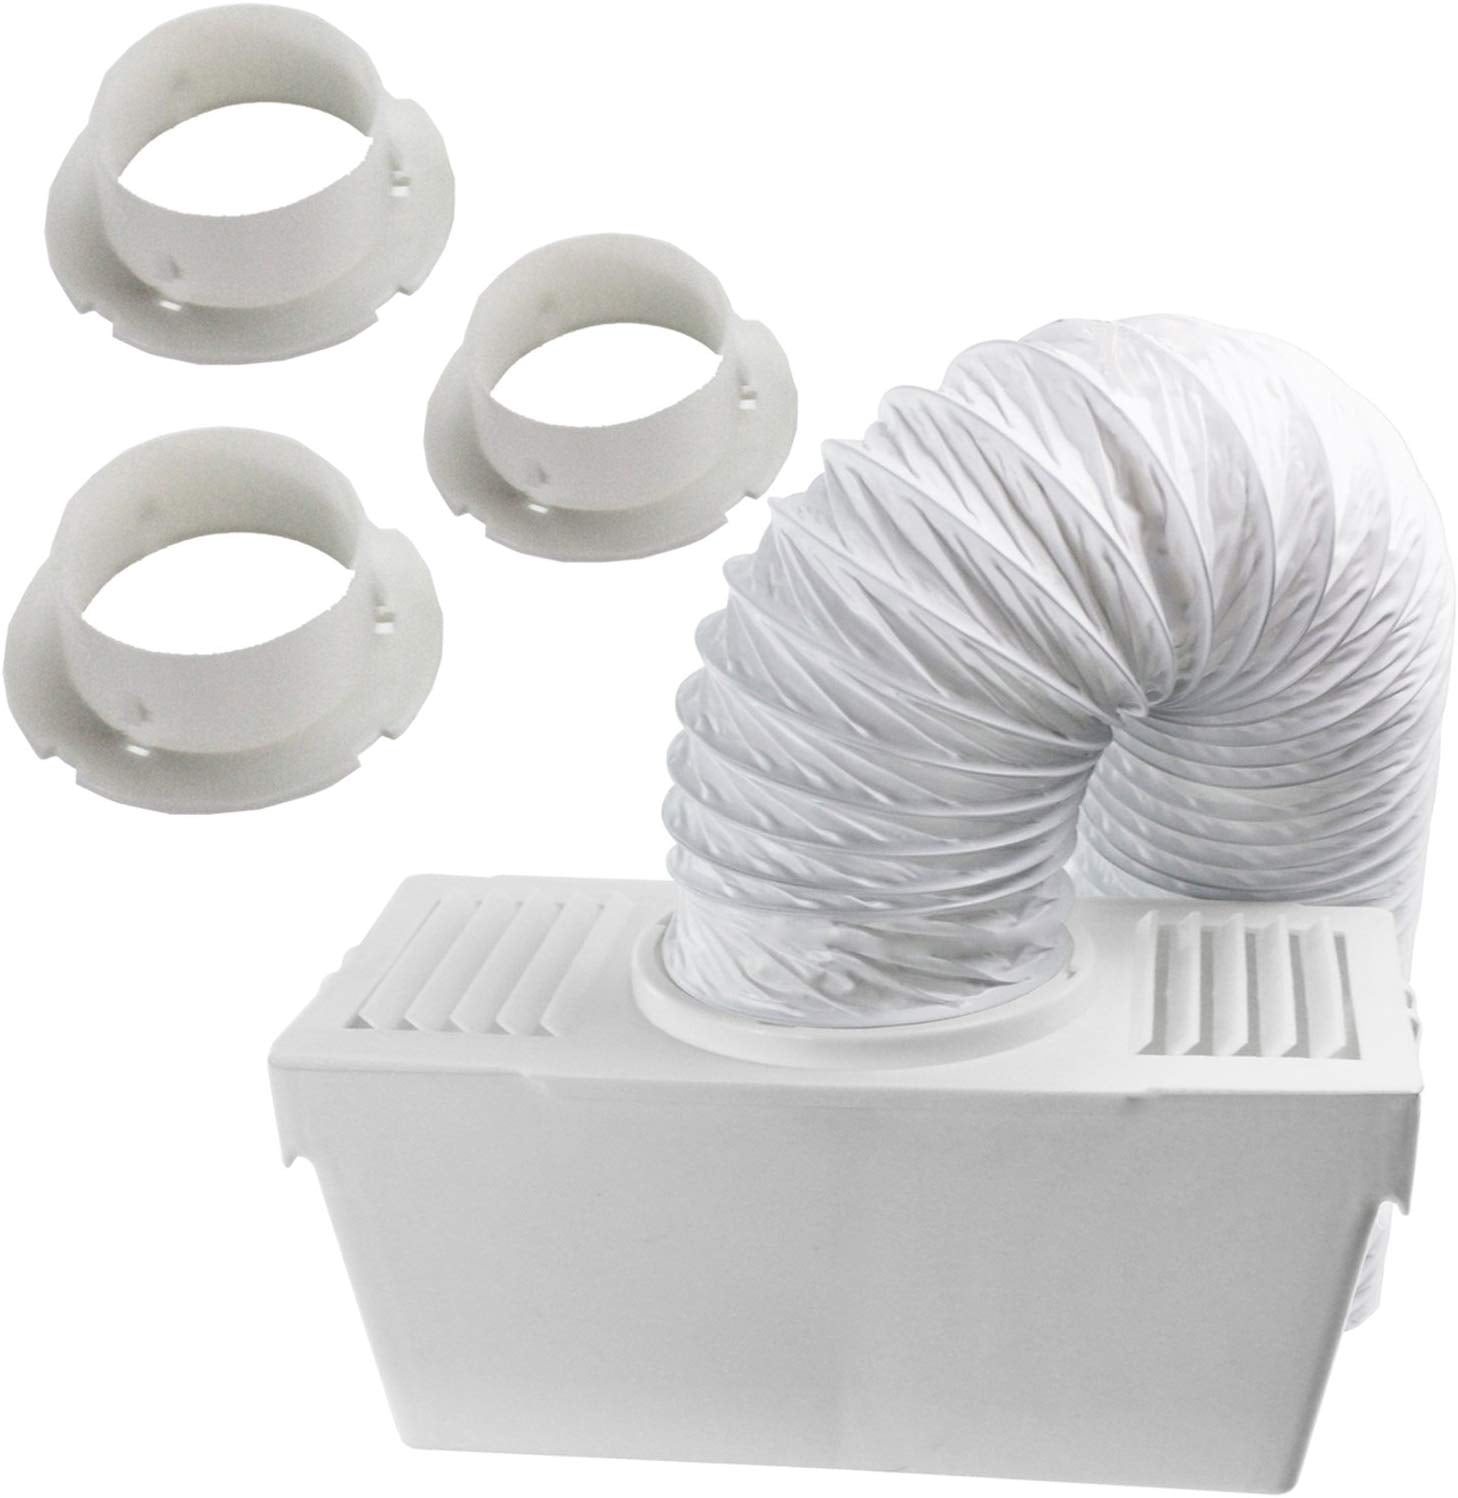 Vent Hose Condenser Kit with 3 x Adapters for Beko Tumble Dryer (1.2m)